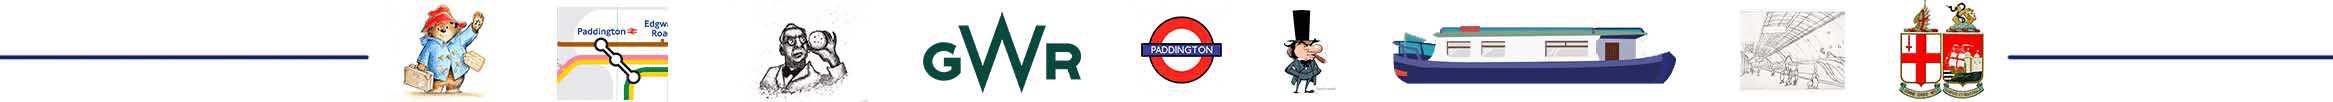 best-place-to-stay-in-london-paddington-icons